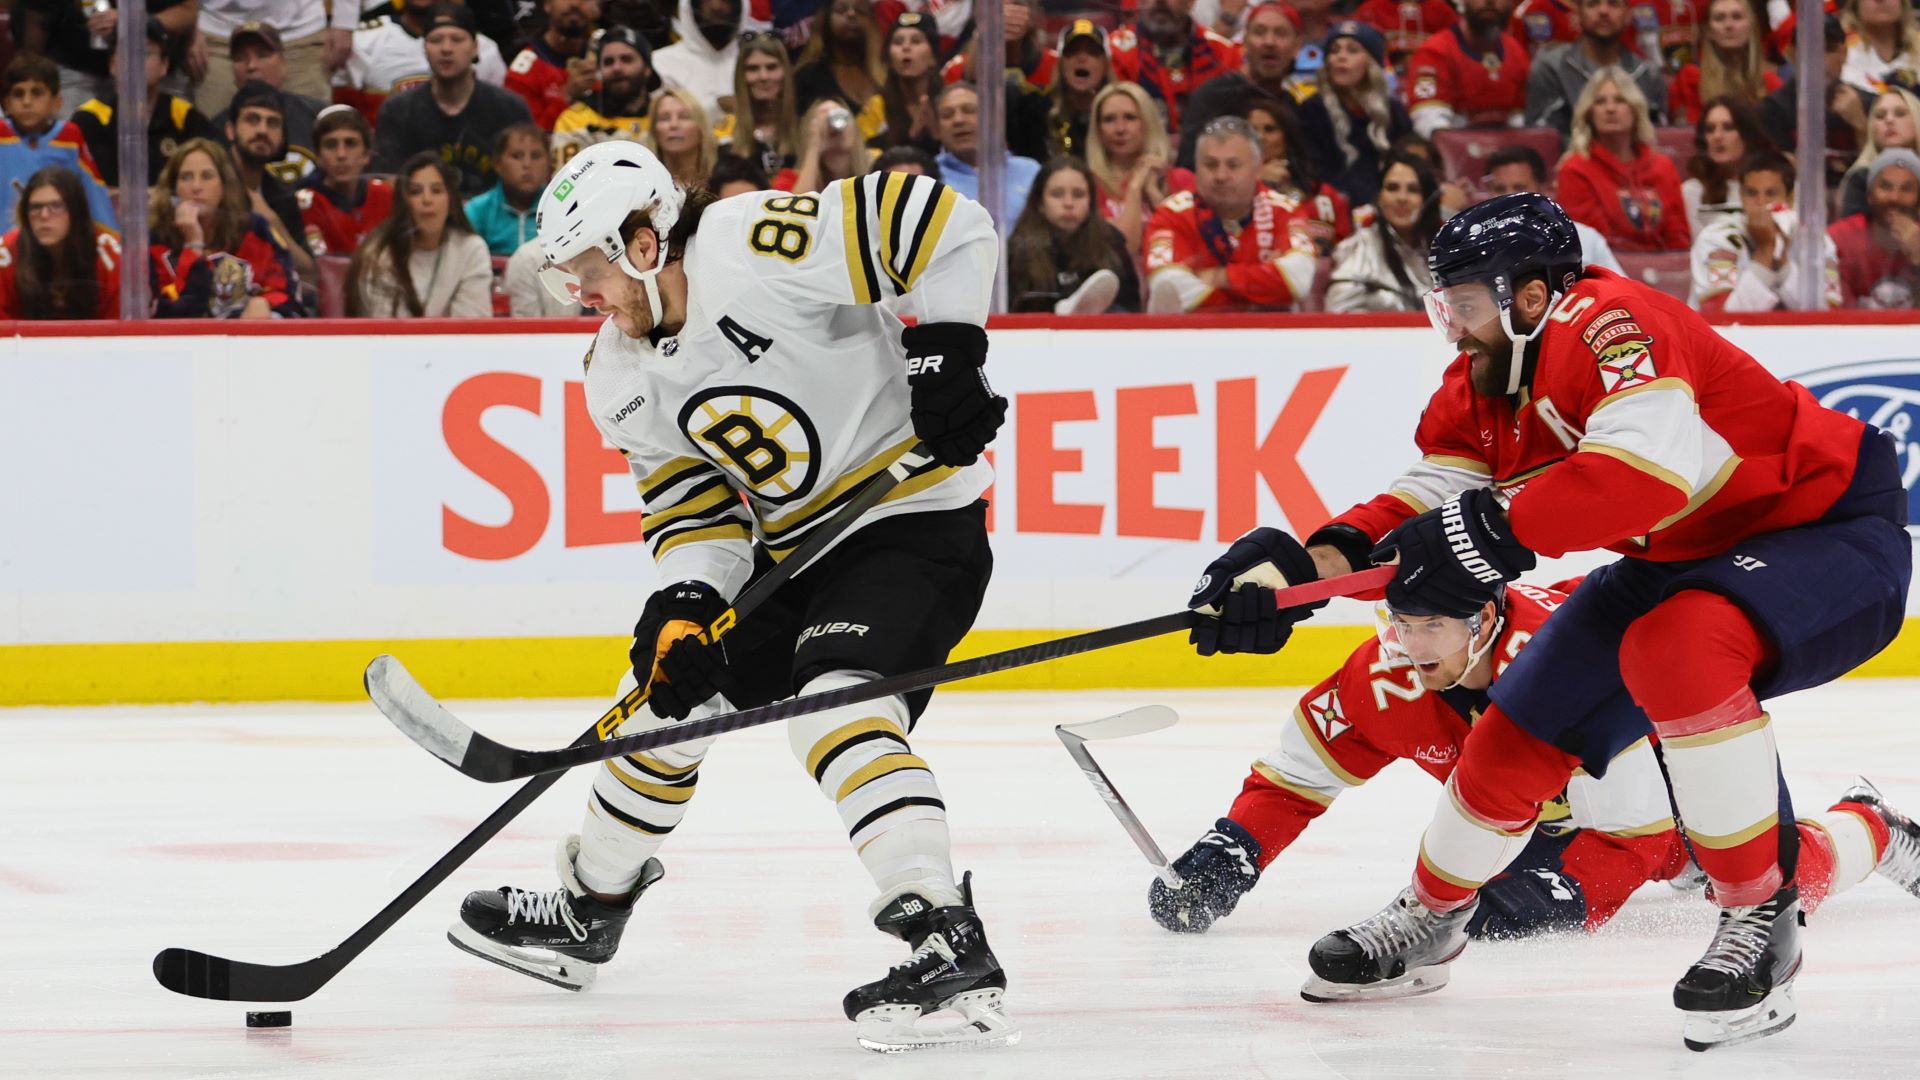 David Pastrnak’s Game 2 Fight ‘Fired Up’ Bruins Teammate